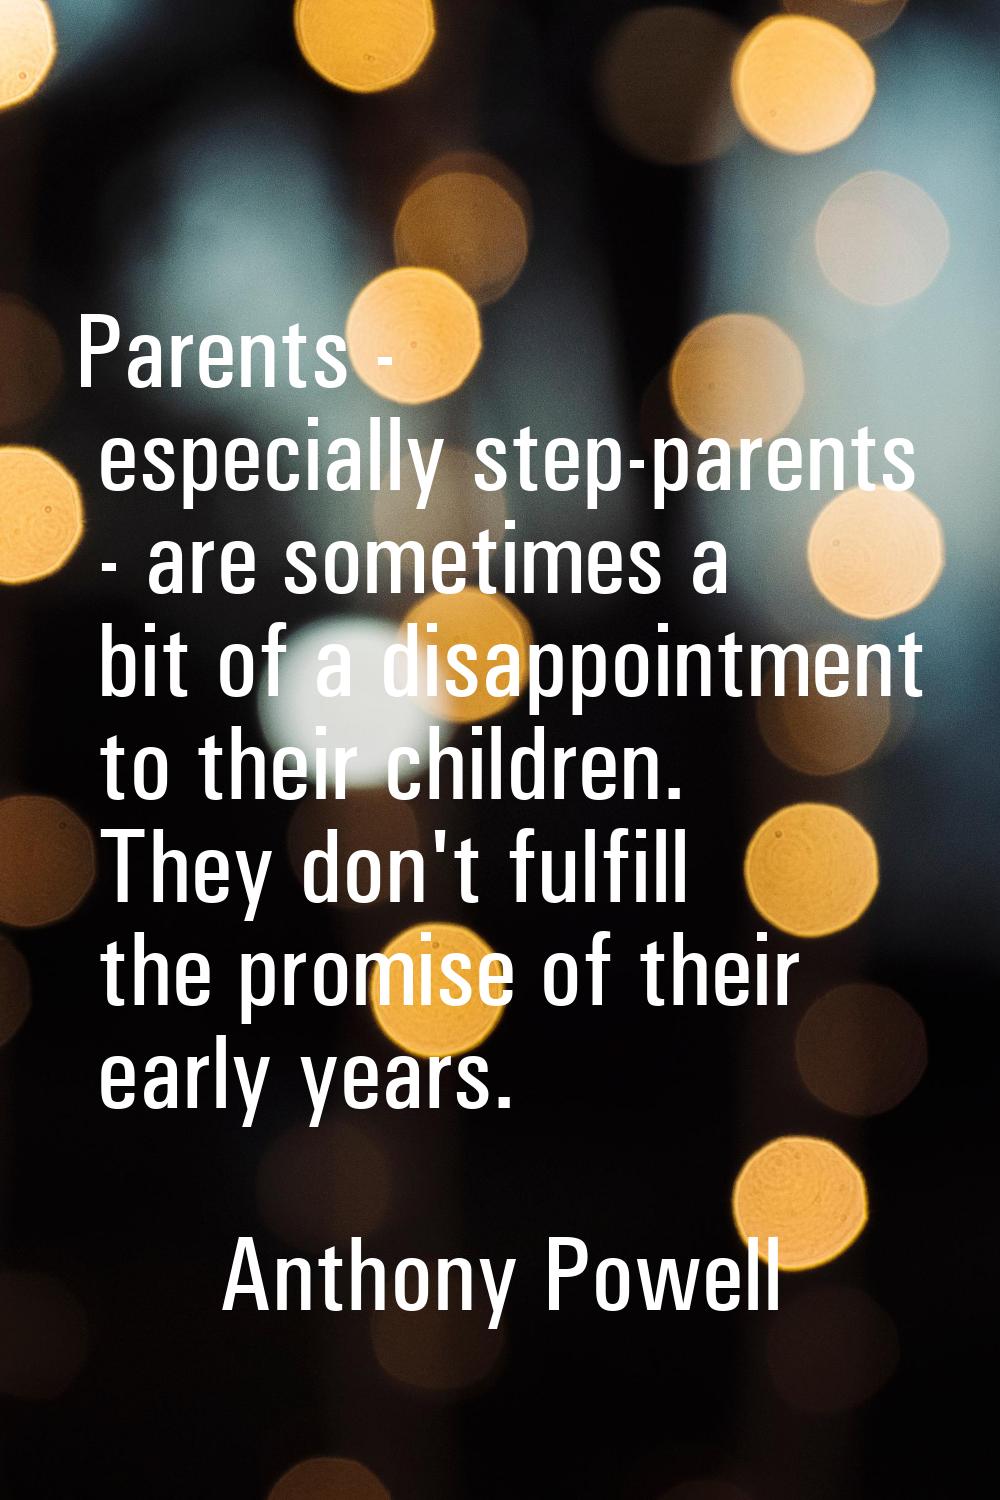 Parents - especially step-parents - are sometimes a bit of a disappointment to their children. They